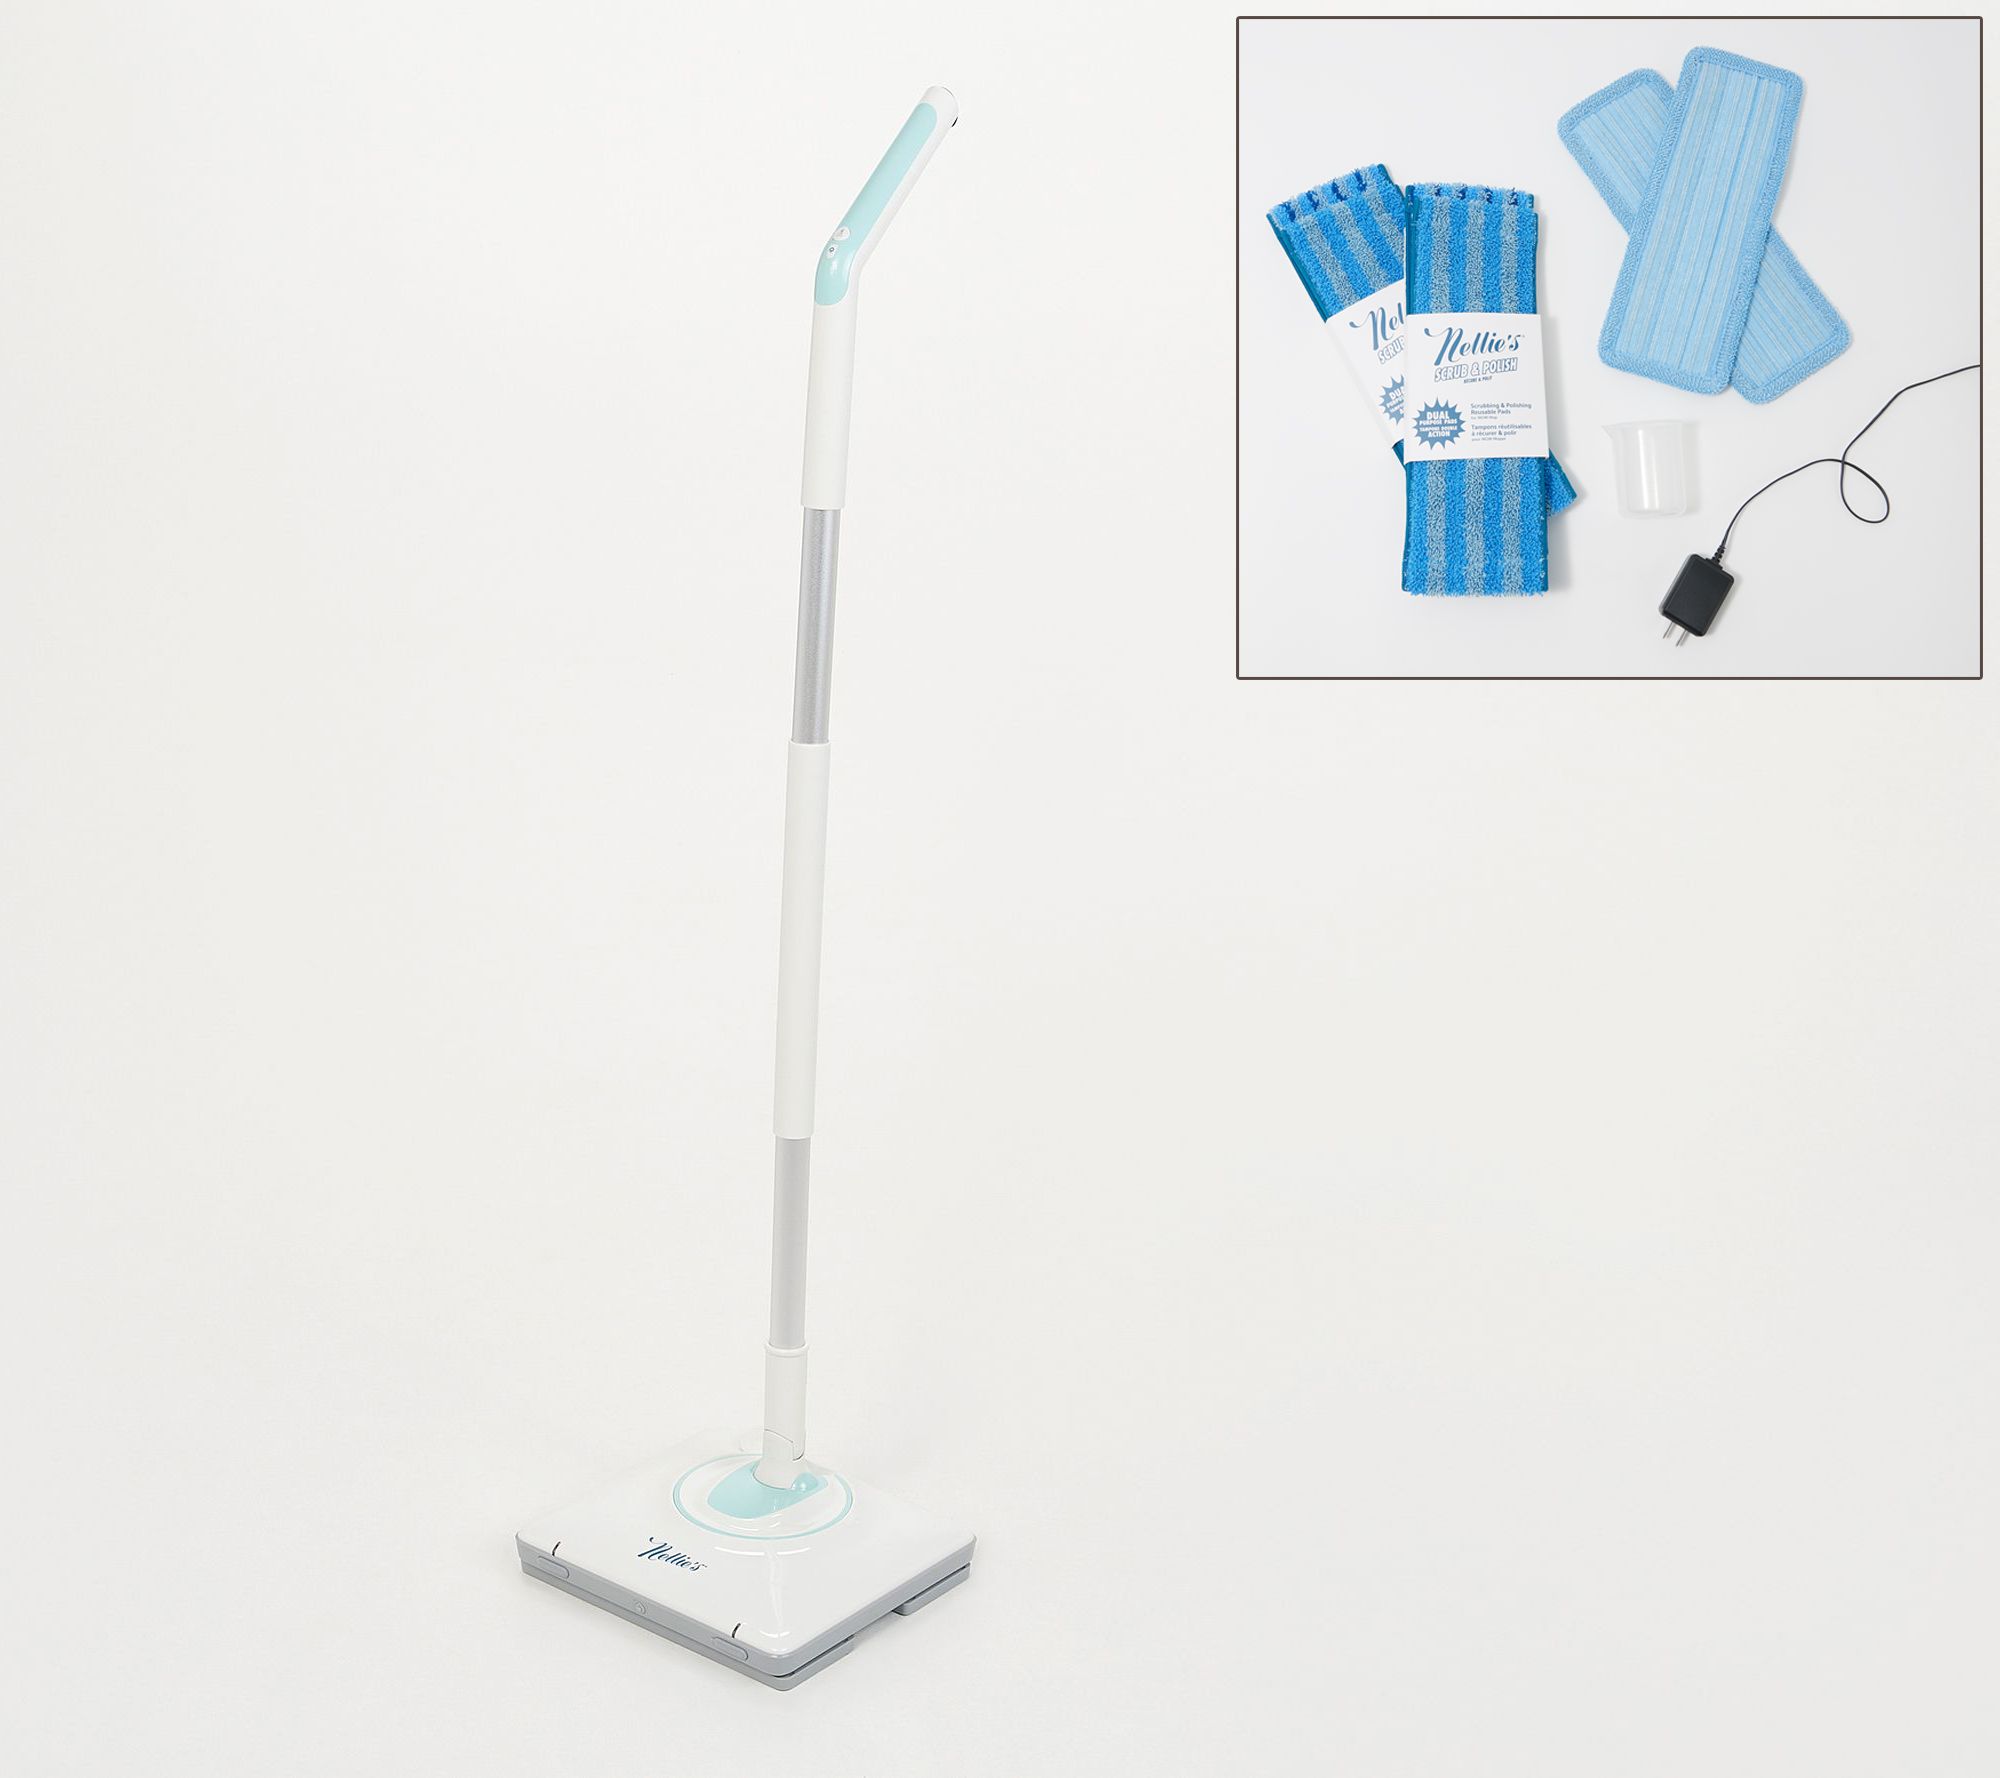 Cordless oscillating mop with microfiber pads